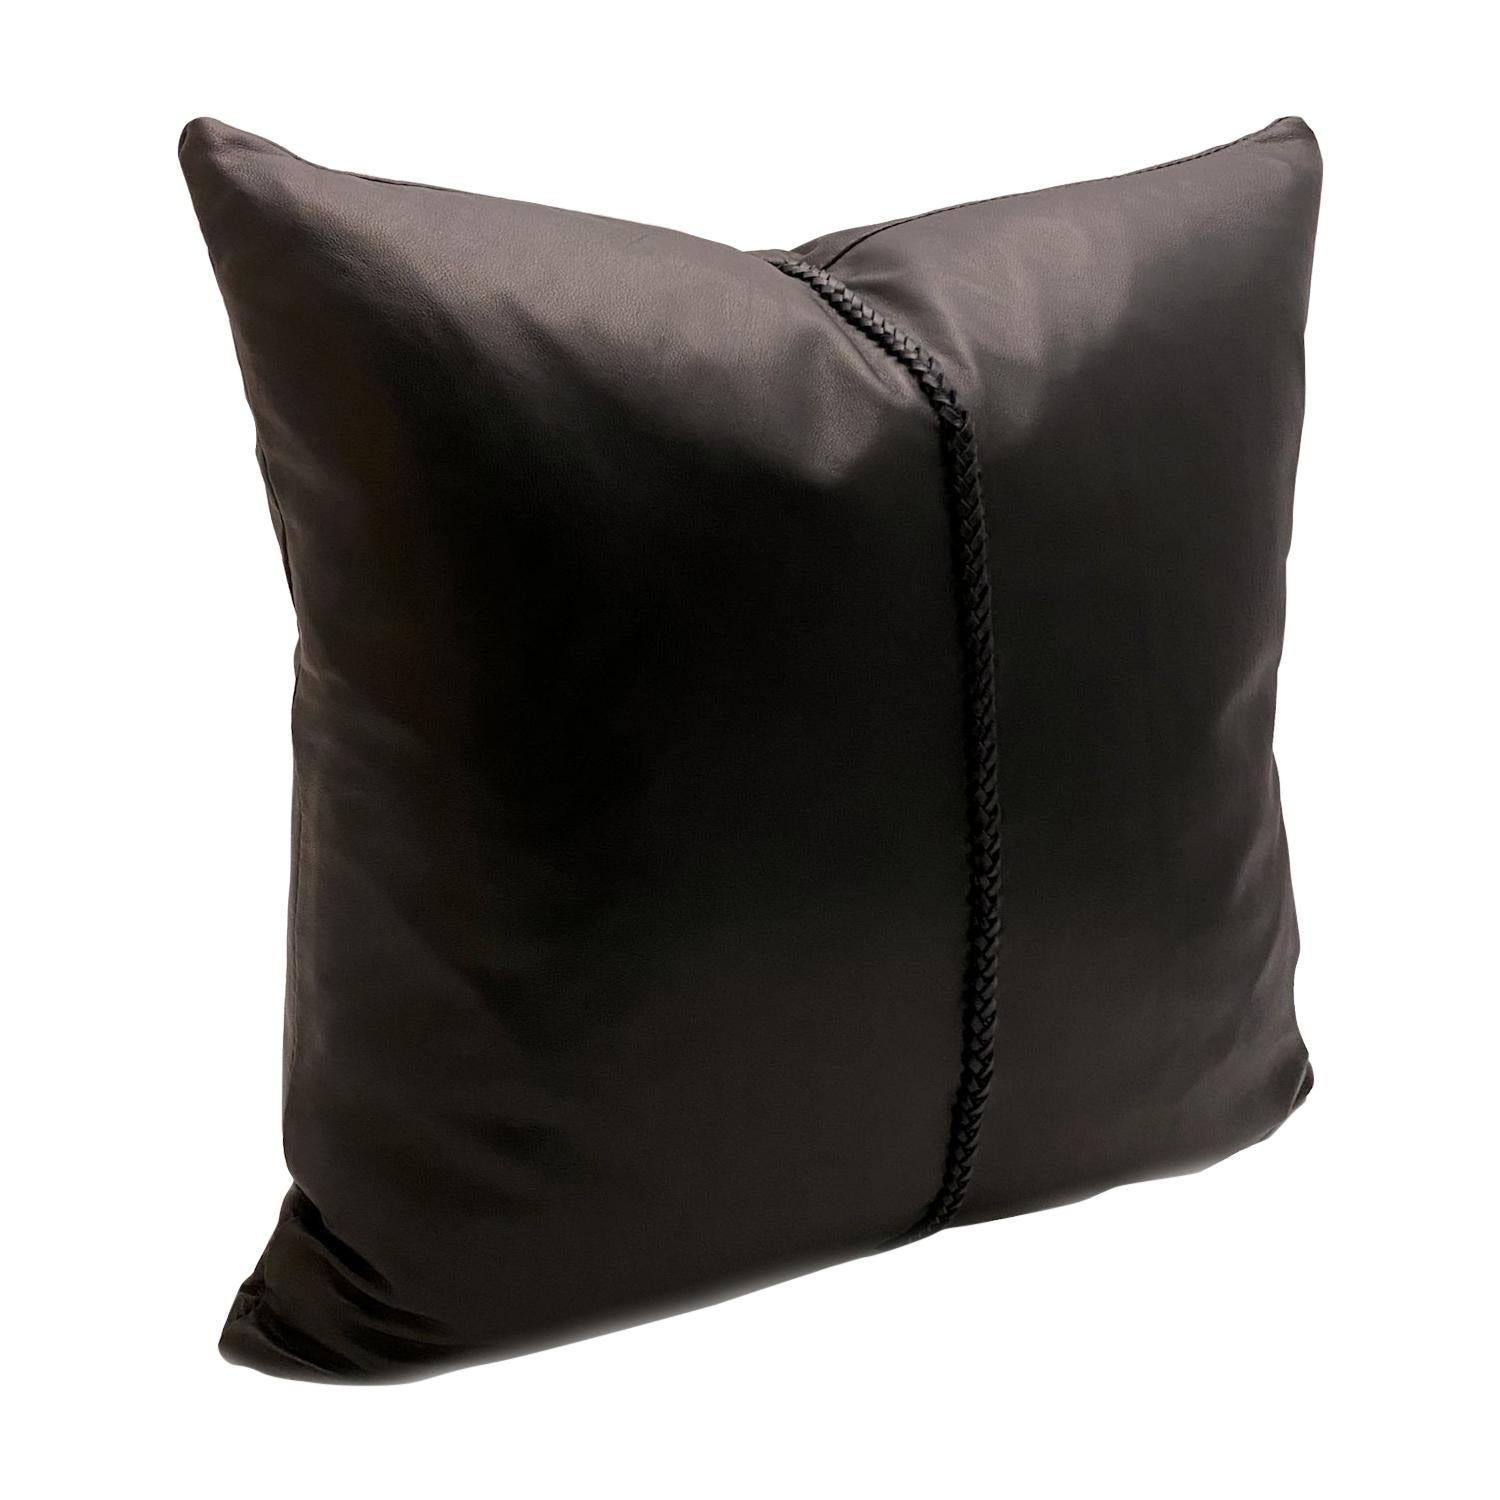 Black Leather Pillow with Leather Cross Stitch For Sale